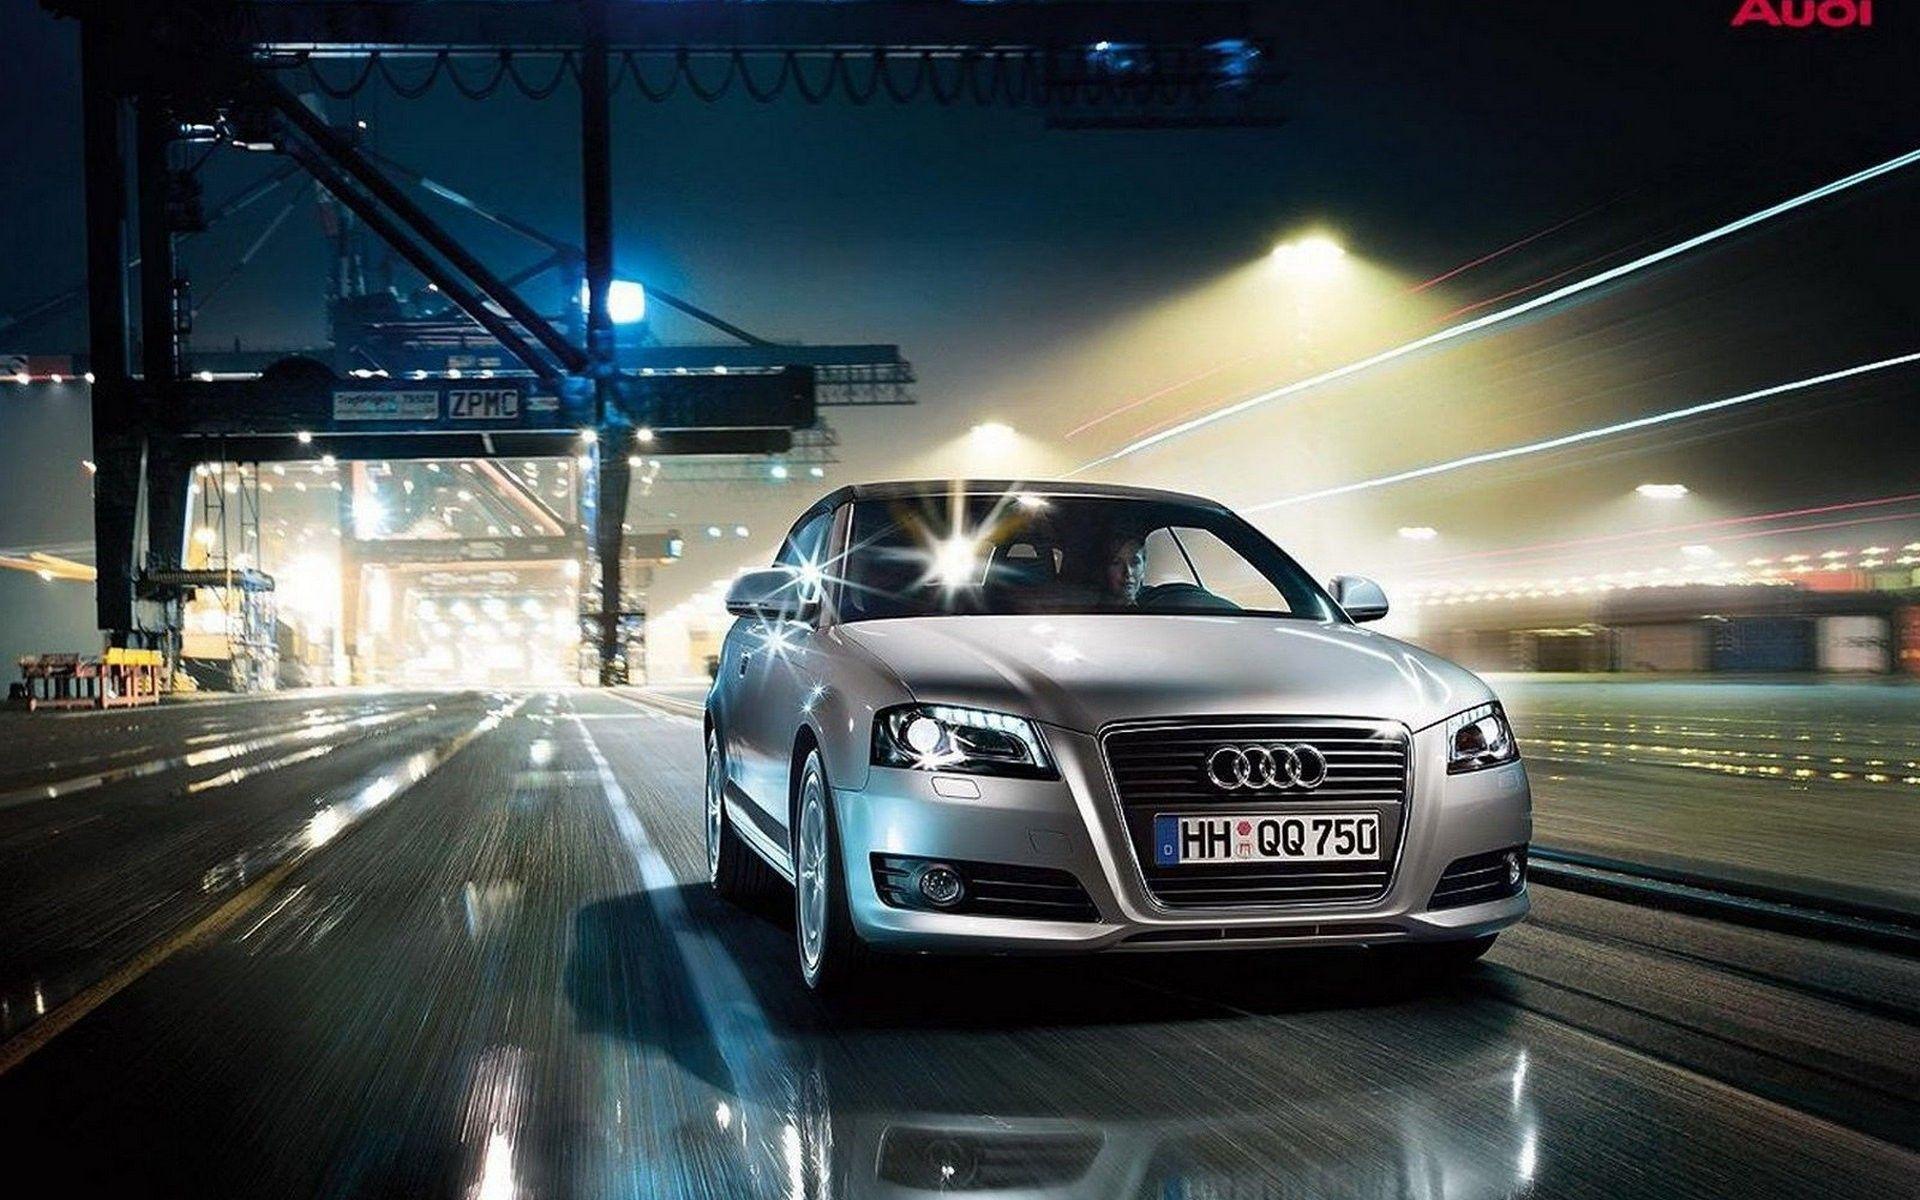 Audi A3 Wallpapers, Pictures, Images